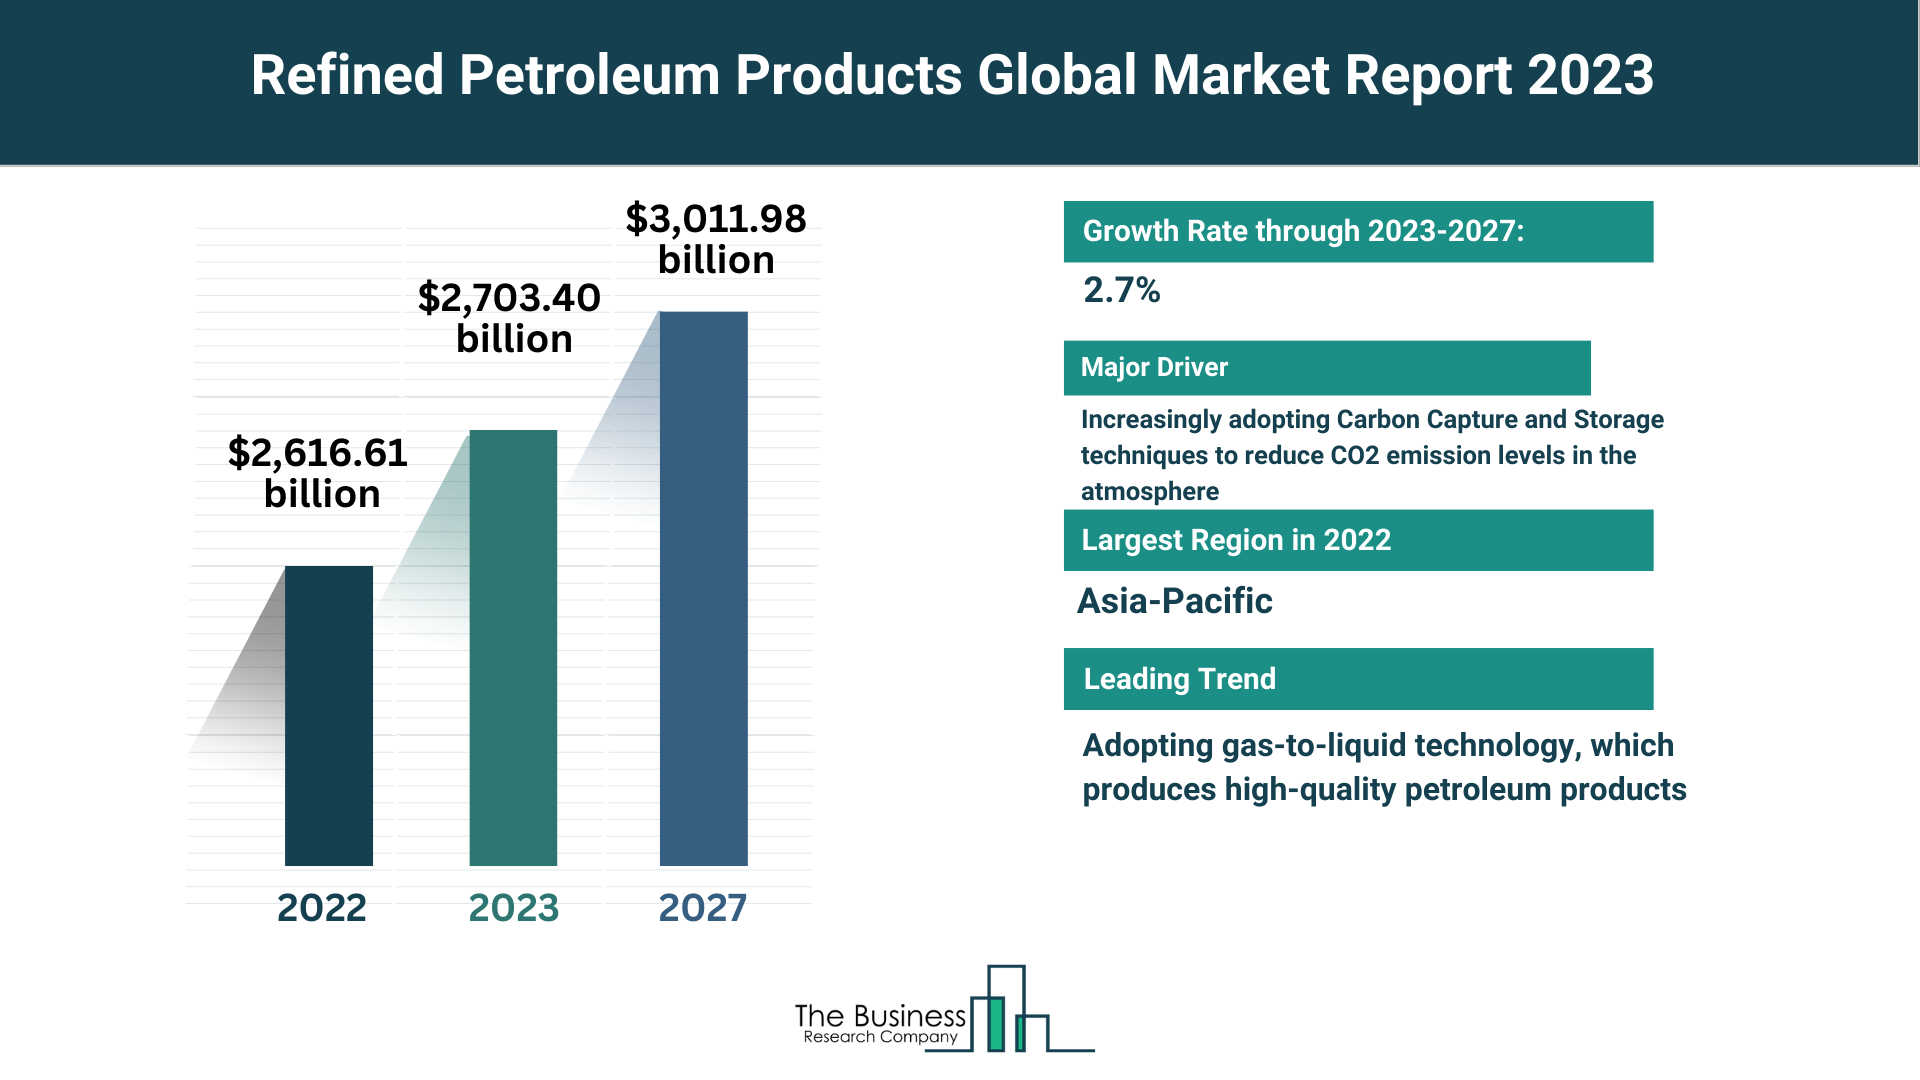 Global Refined Petroleum Products Market